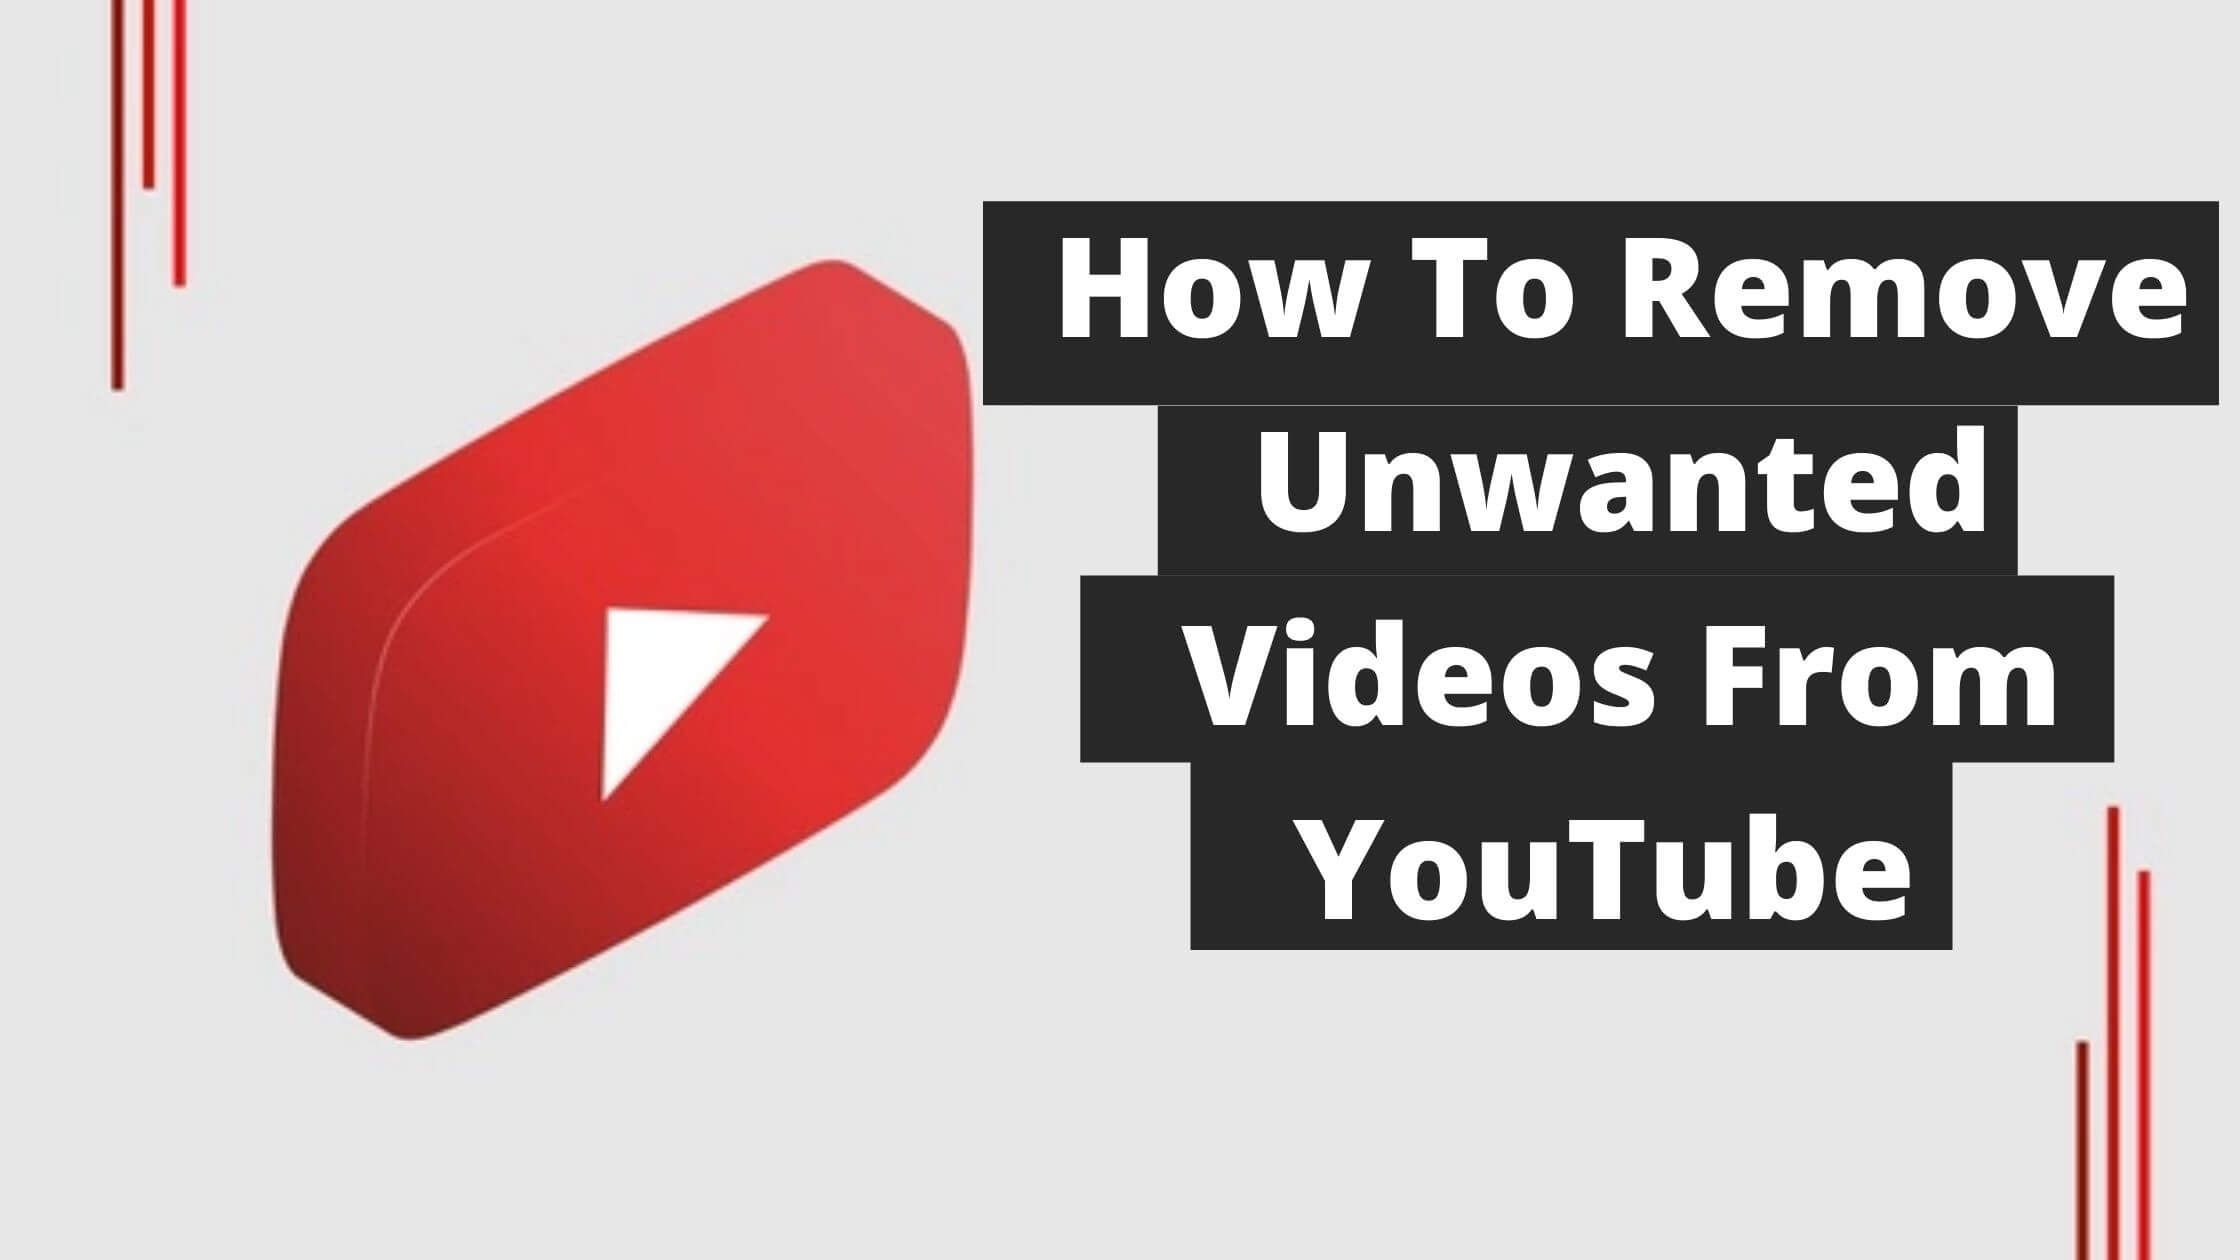 How To Remove Unwanted Videos From YouTube